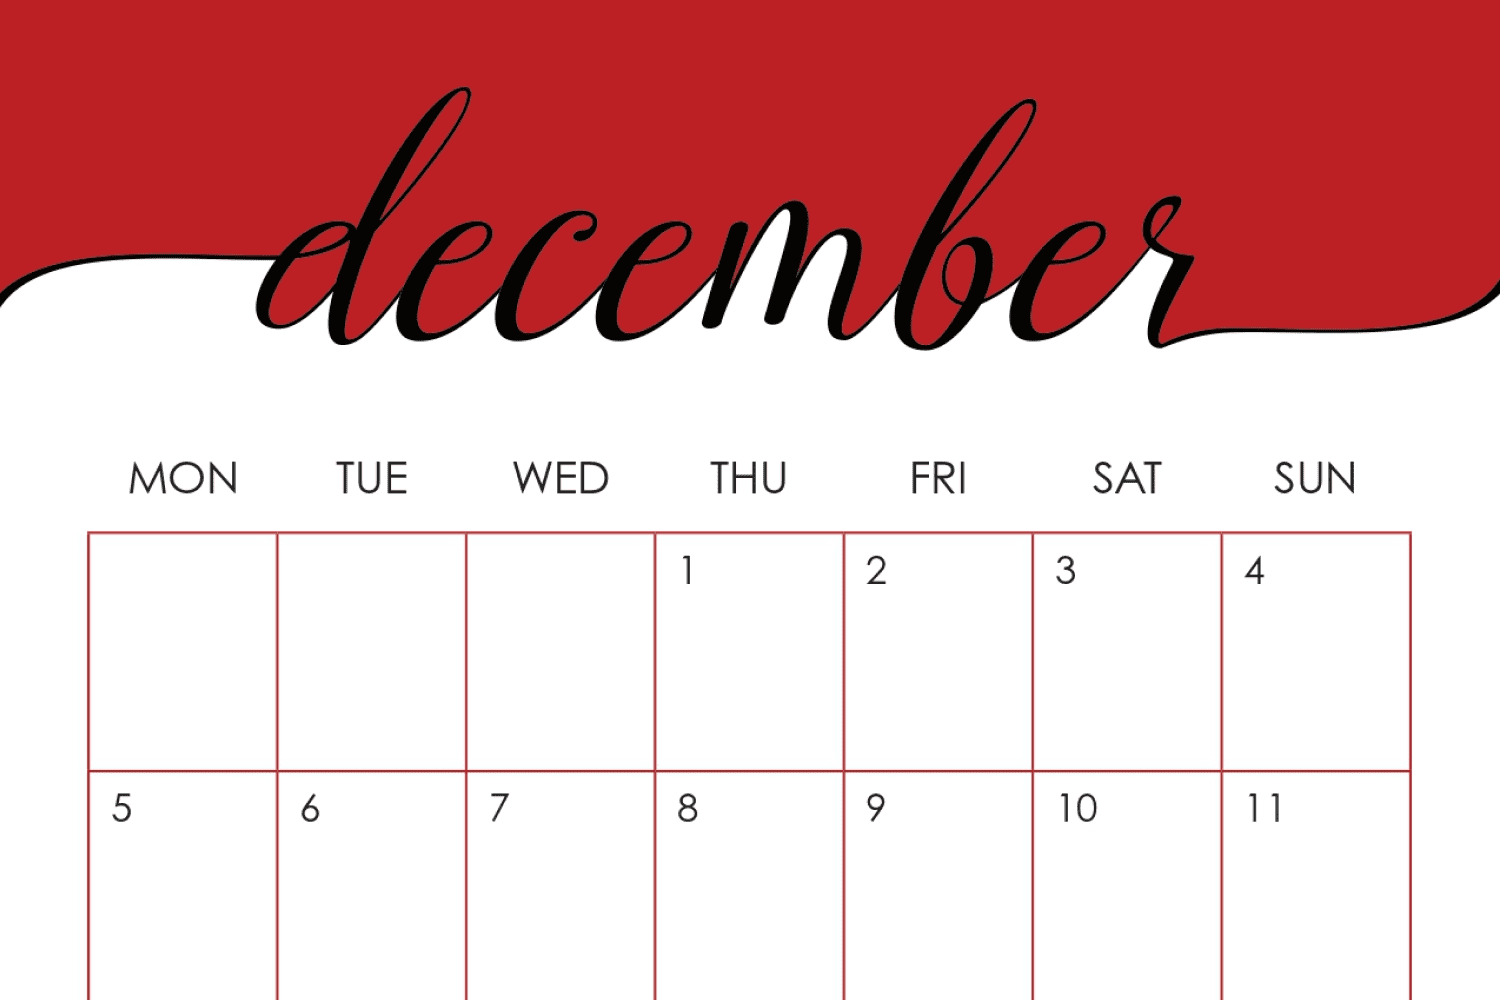 Simple december calendar with a white-red design.